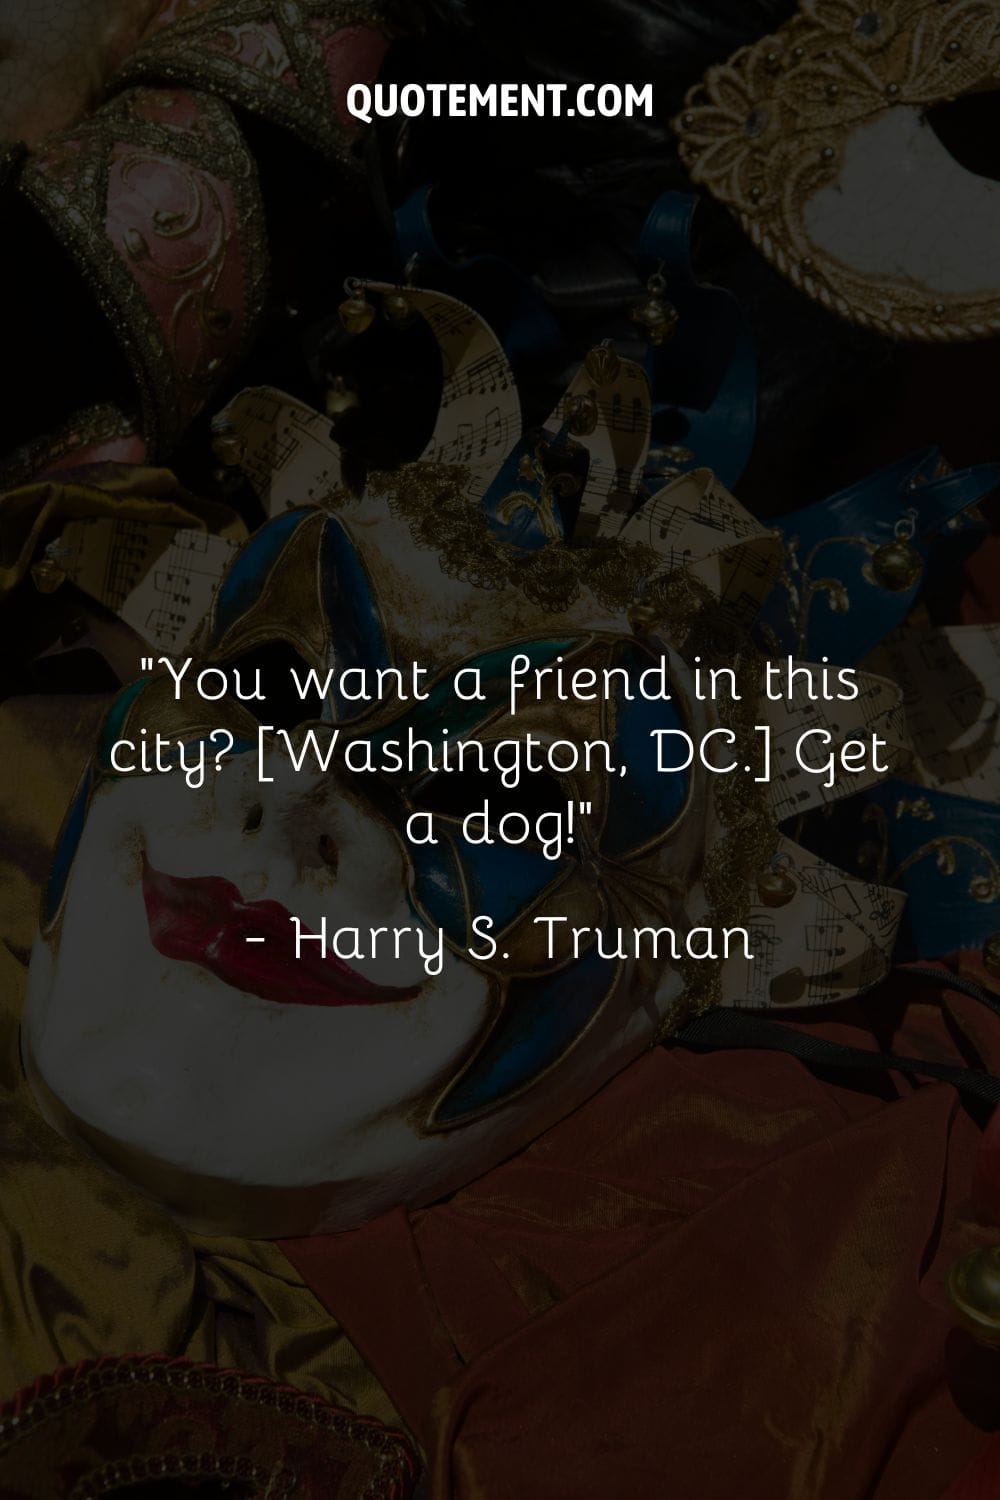 You want a friend in this city [Washington, DC.] Get a dog